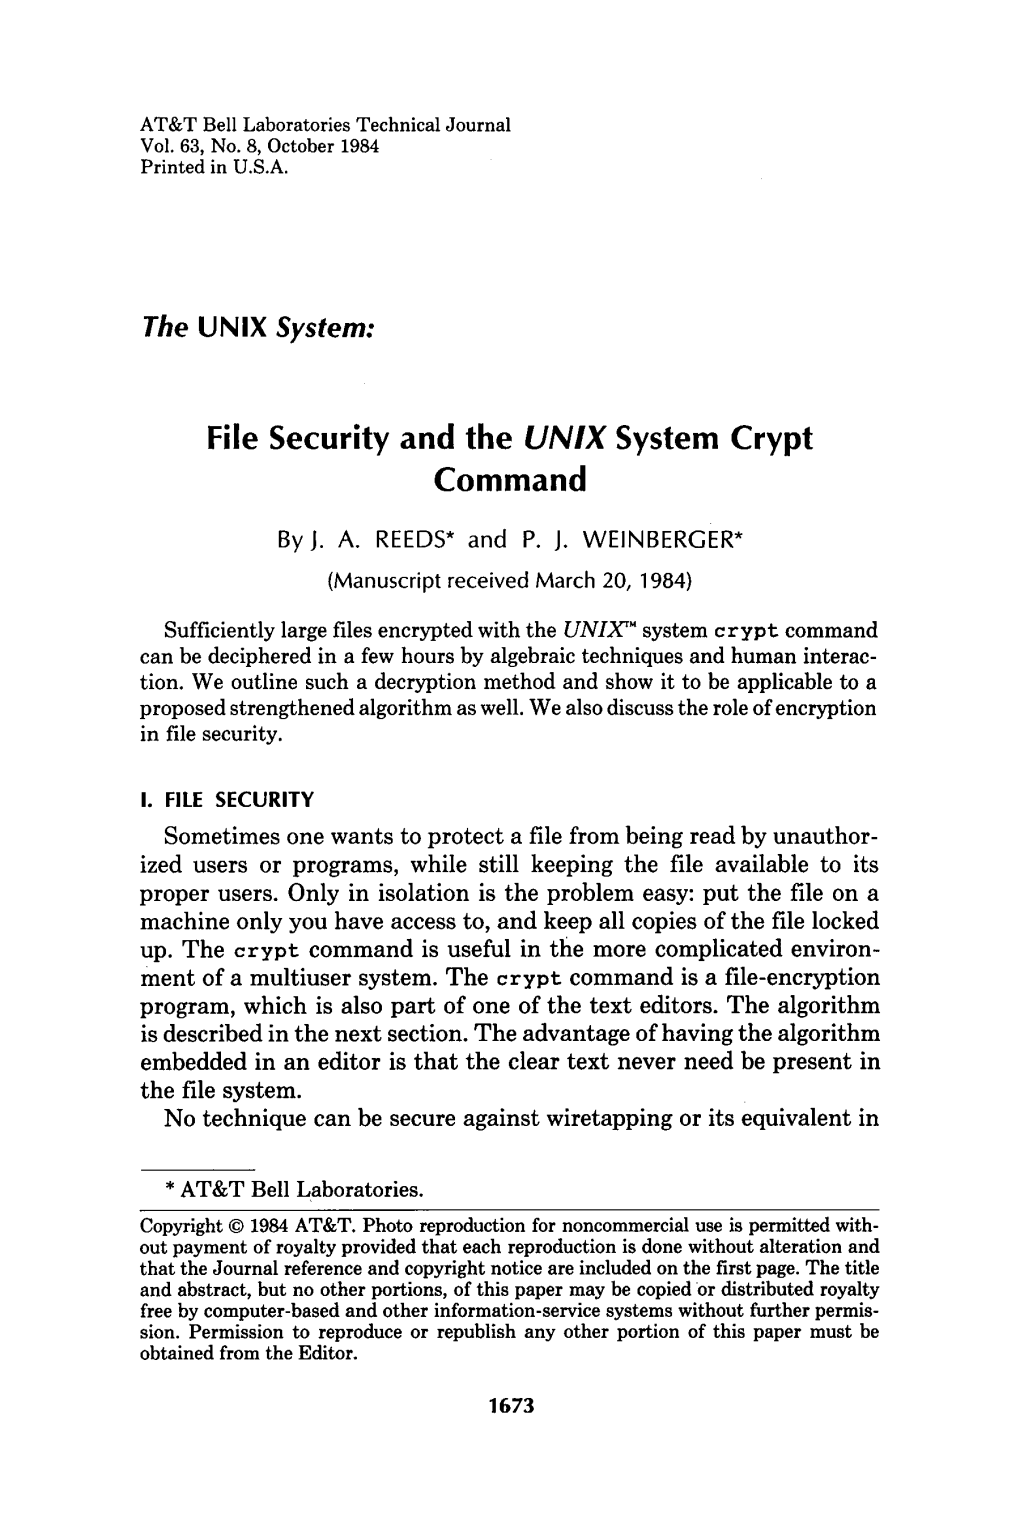 File Security and the UNIX System Crypt Command